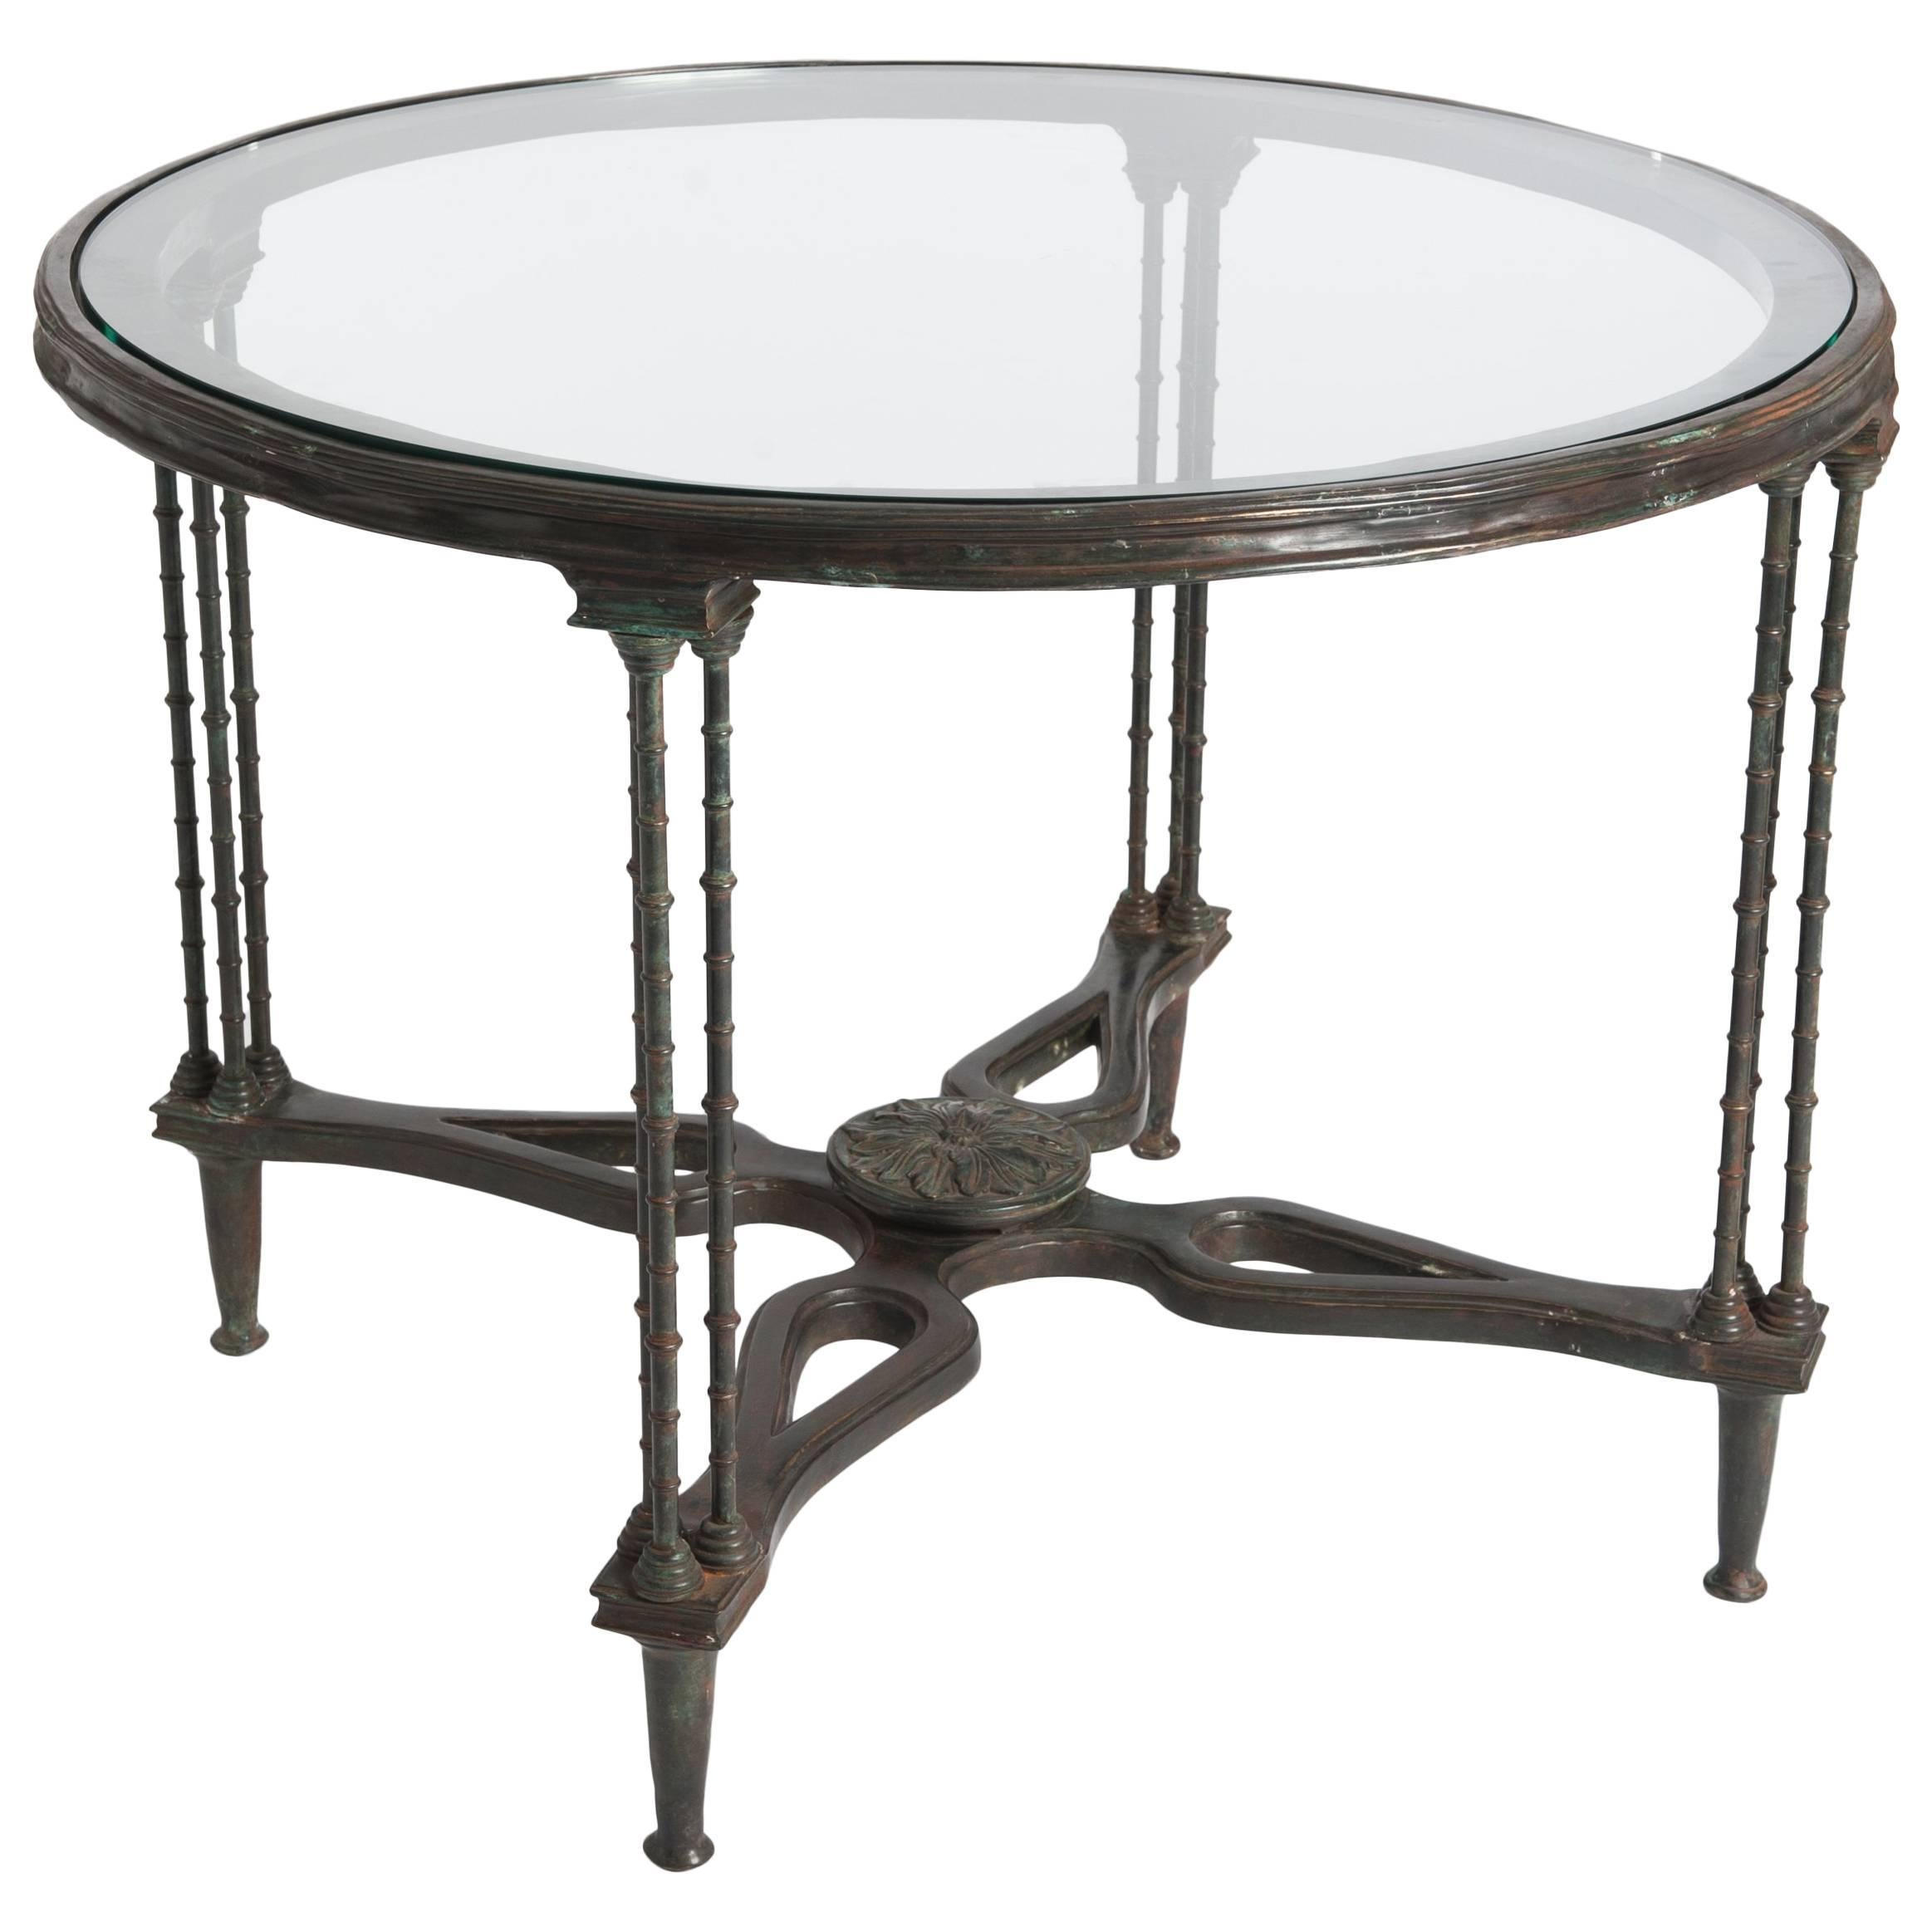 Extraordinary cast bronze Art Nouveau table, naturalistic design with fine bamboo legs, rosette centered with wonderful patina in green-grey color.
Aside from the glass top is also a brown-grey slate top available.